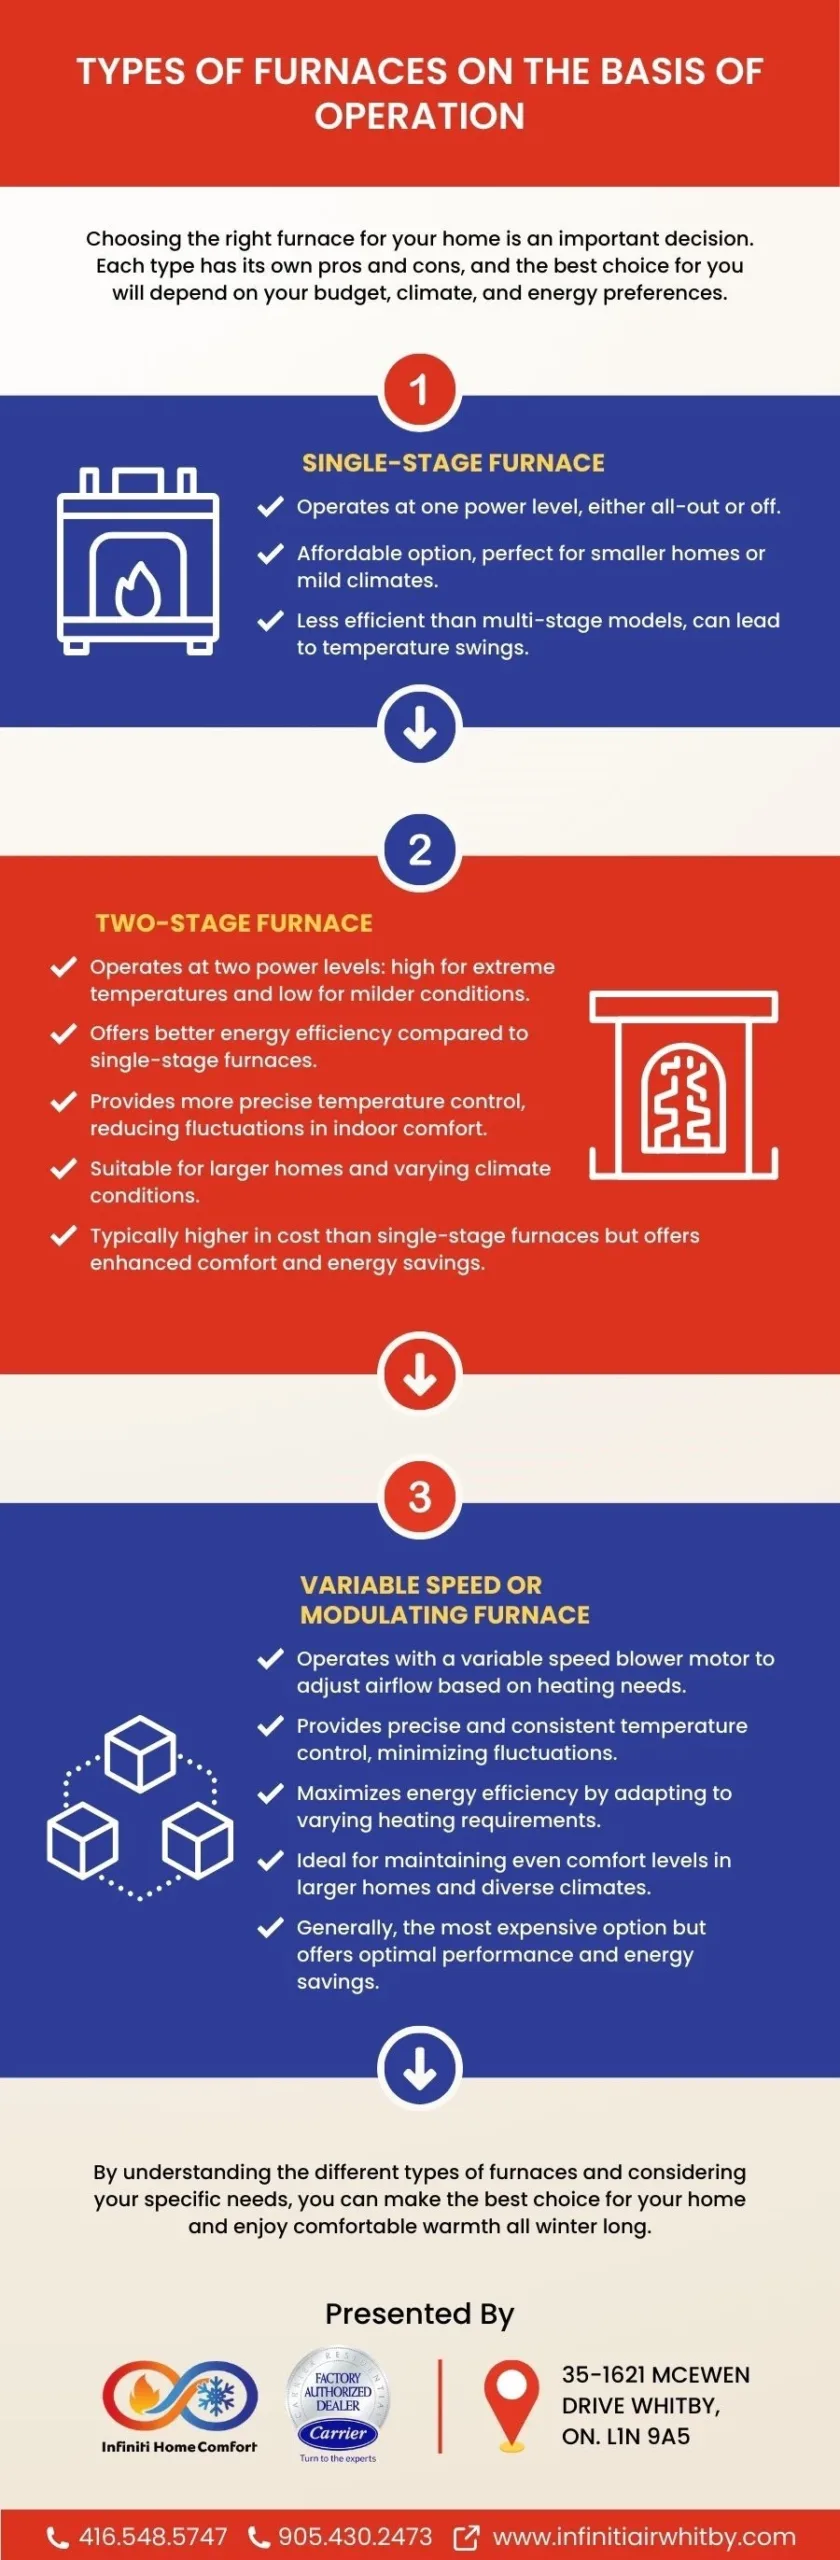 Furnaces can also be differentiated based on their operation. Here’s the infographic that describes the three different types of furnaces on the basis of their operation.